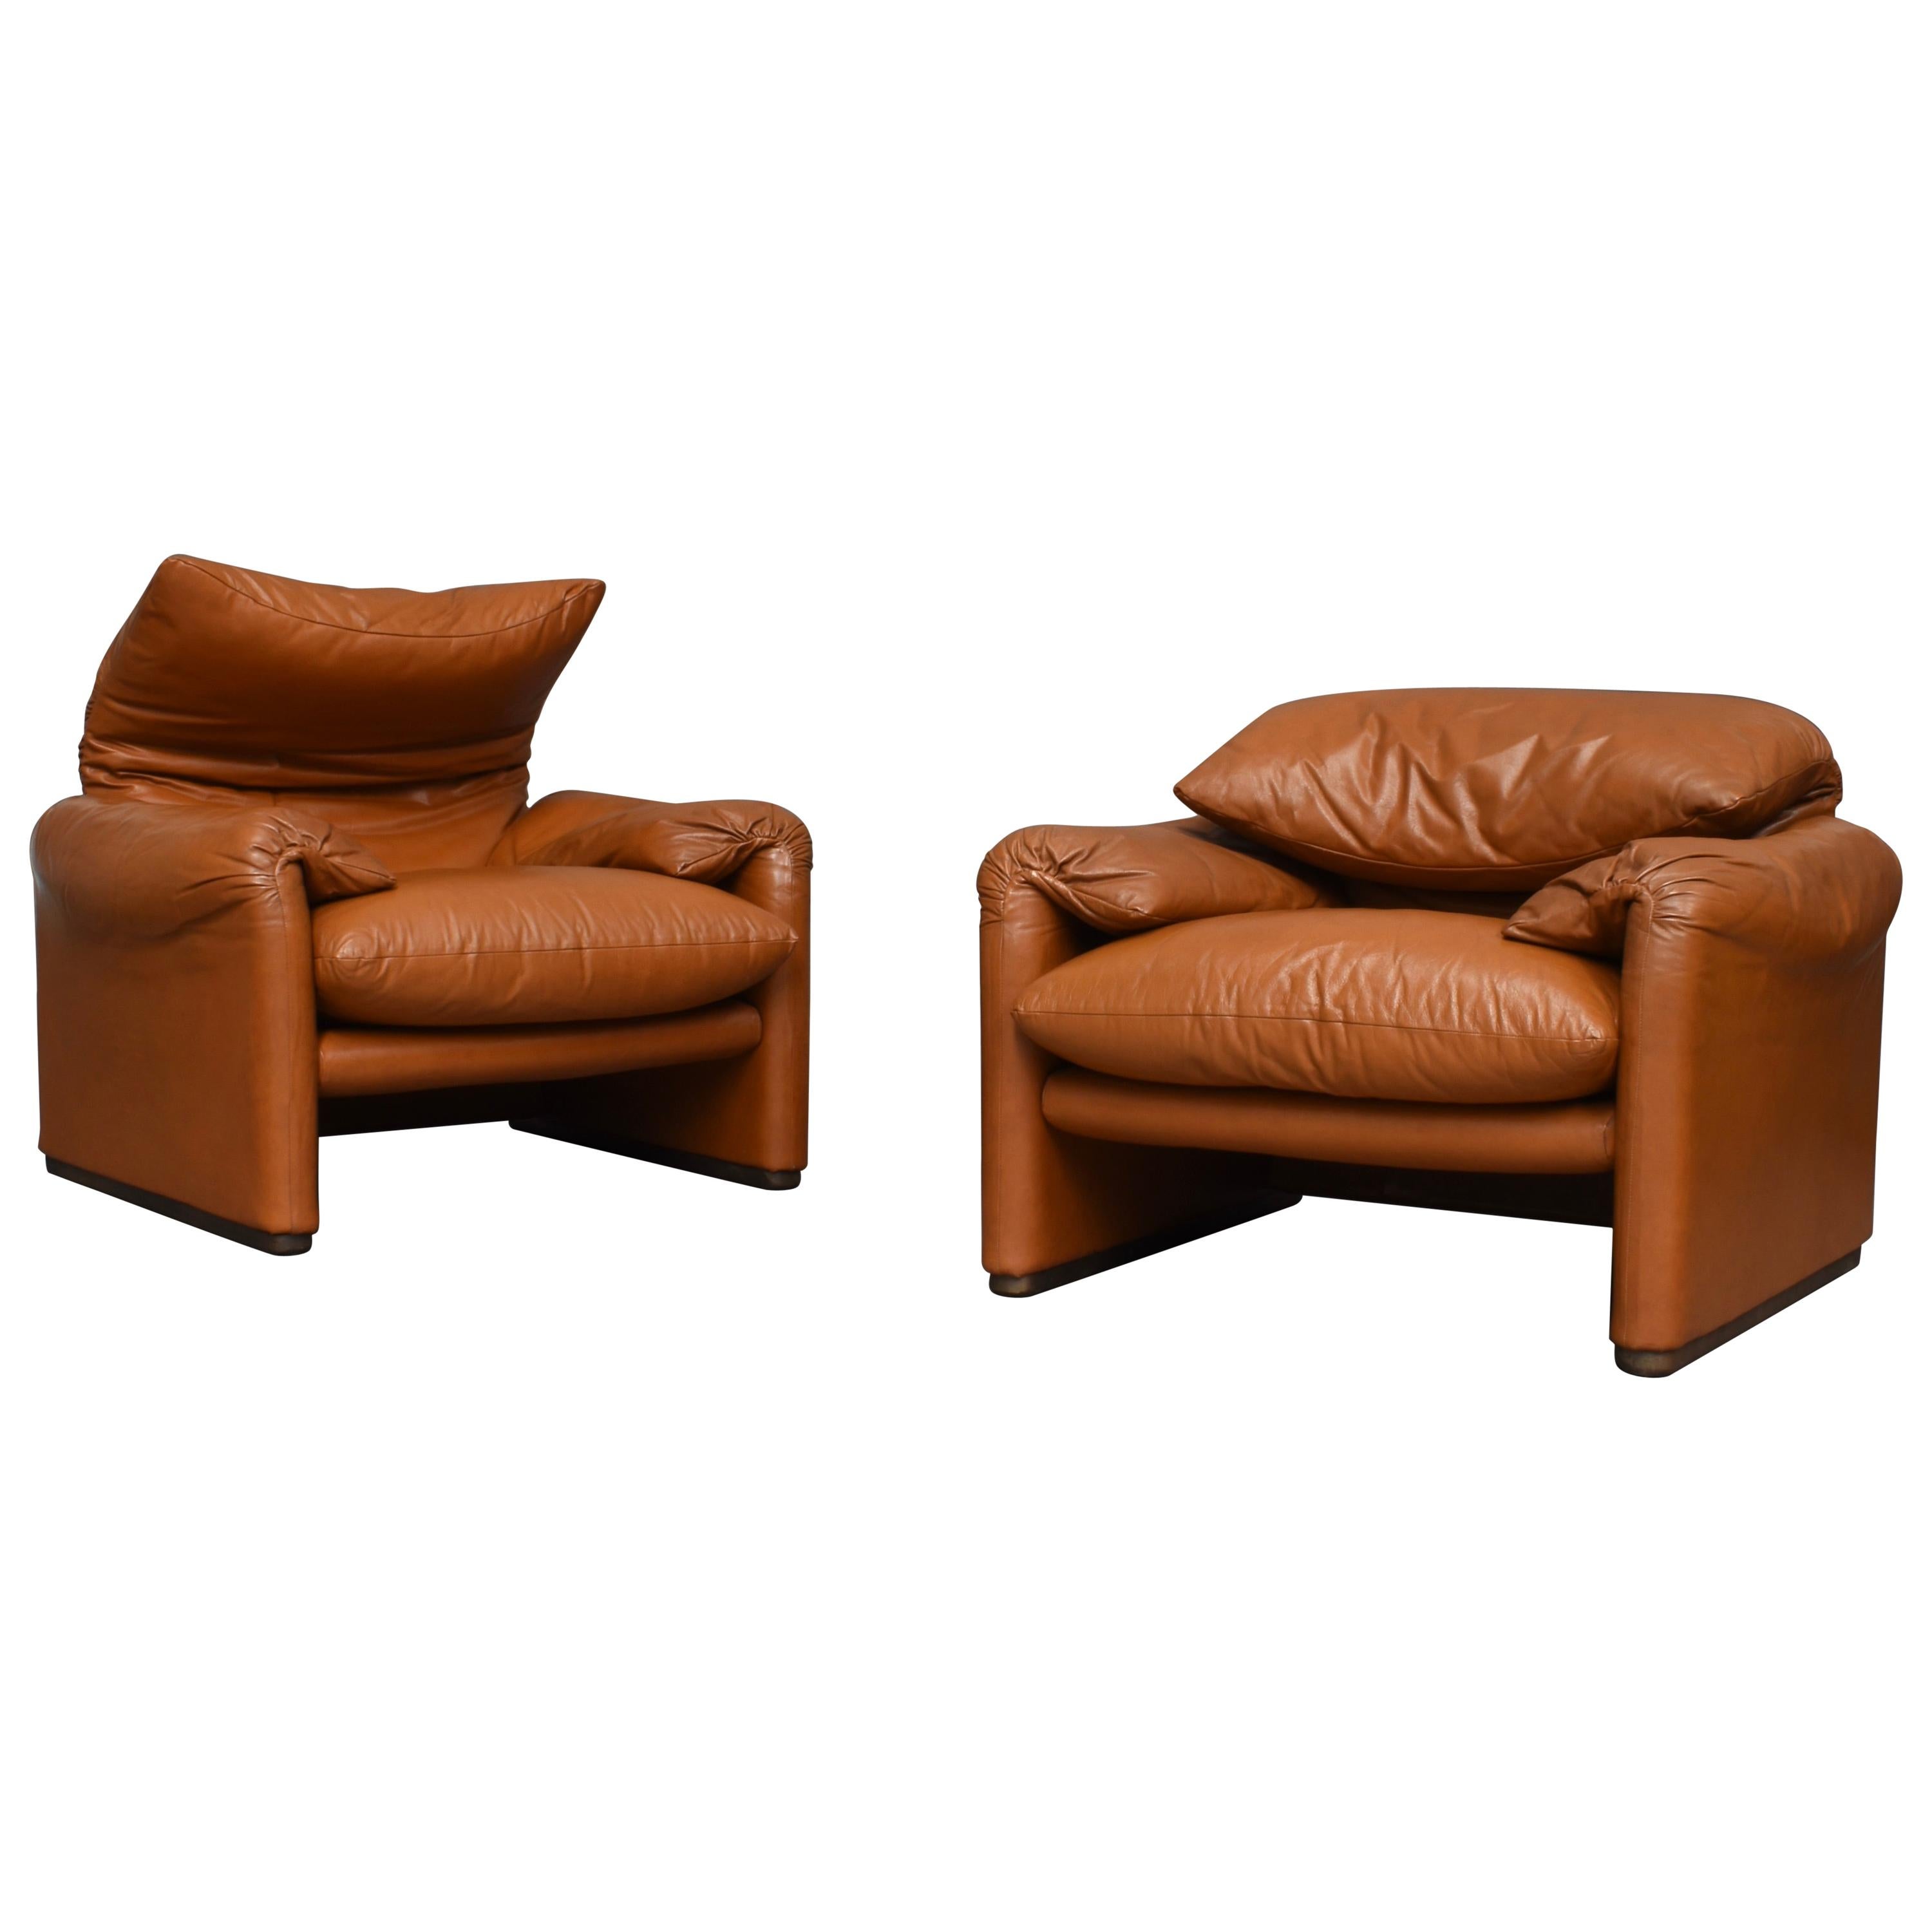 Early Maralunga Armchairs in Leather by Vico Magistretti for Cassina, Italy 1973